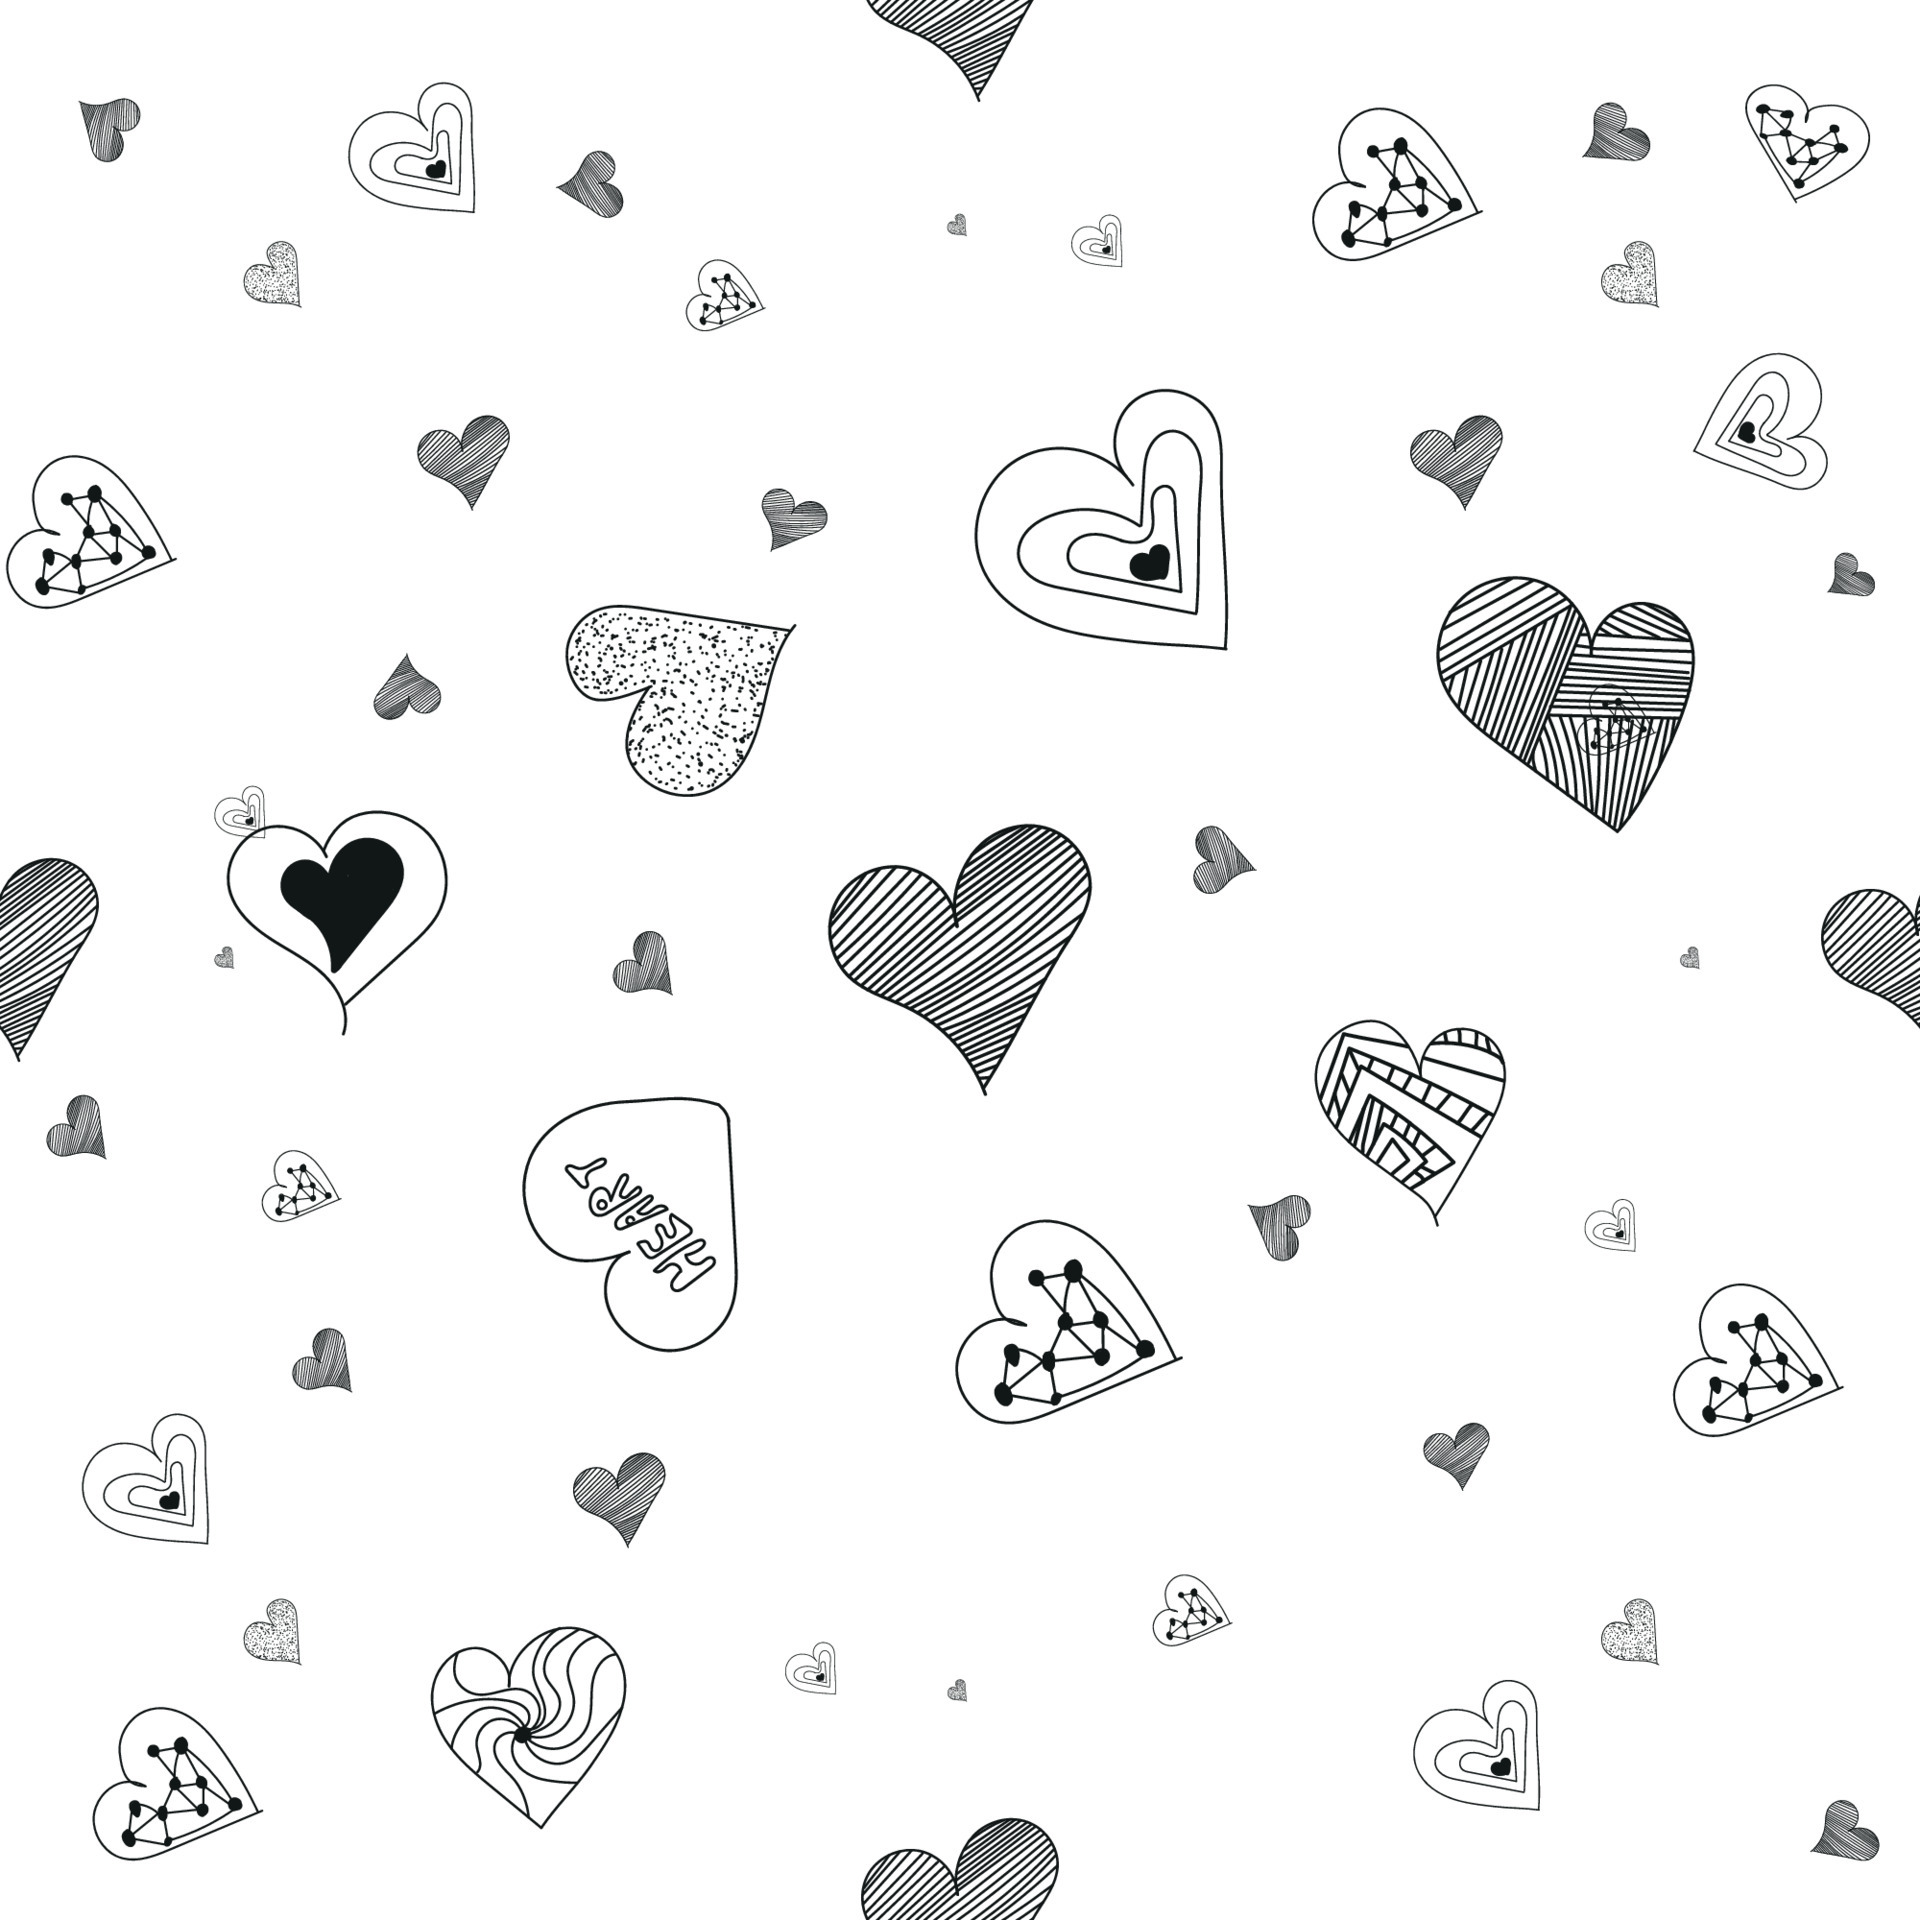 Black Heart Images  Free Photos PNG Stickers Wallpapers  Backgrounds   rawpixel